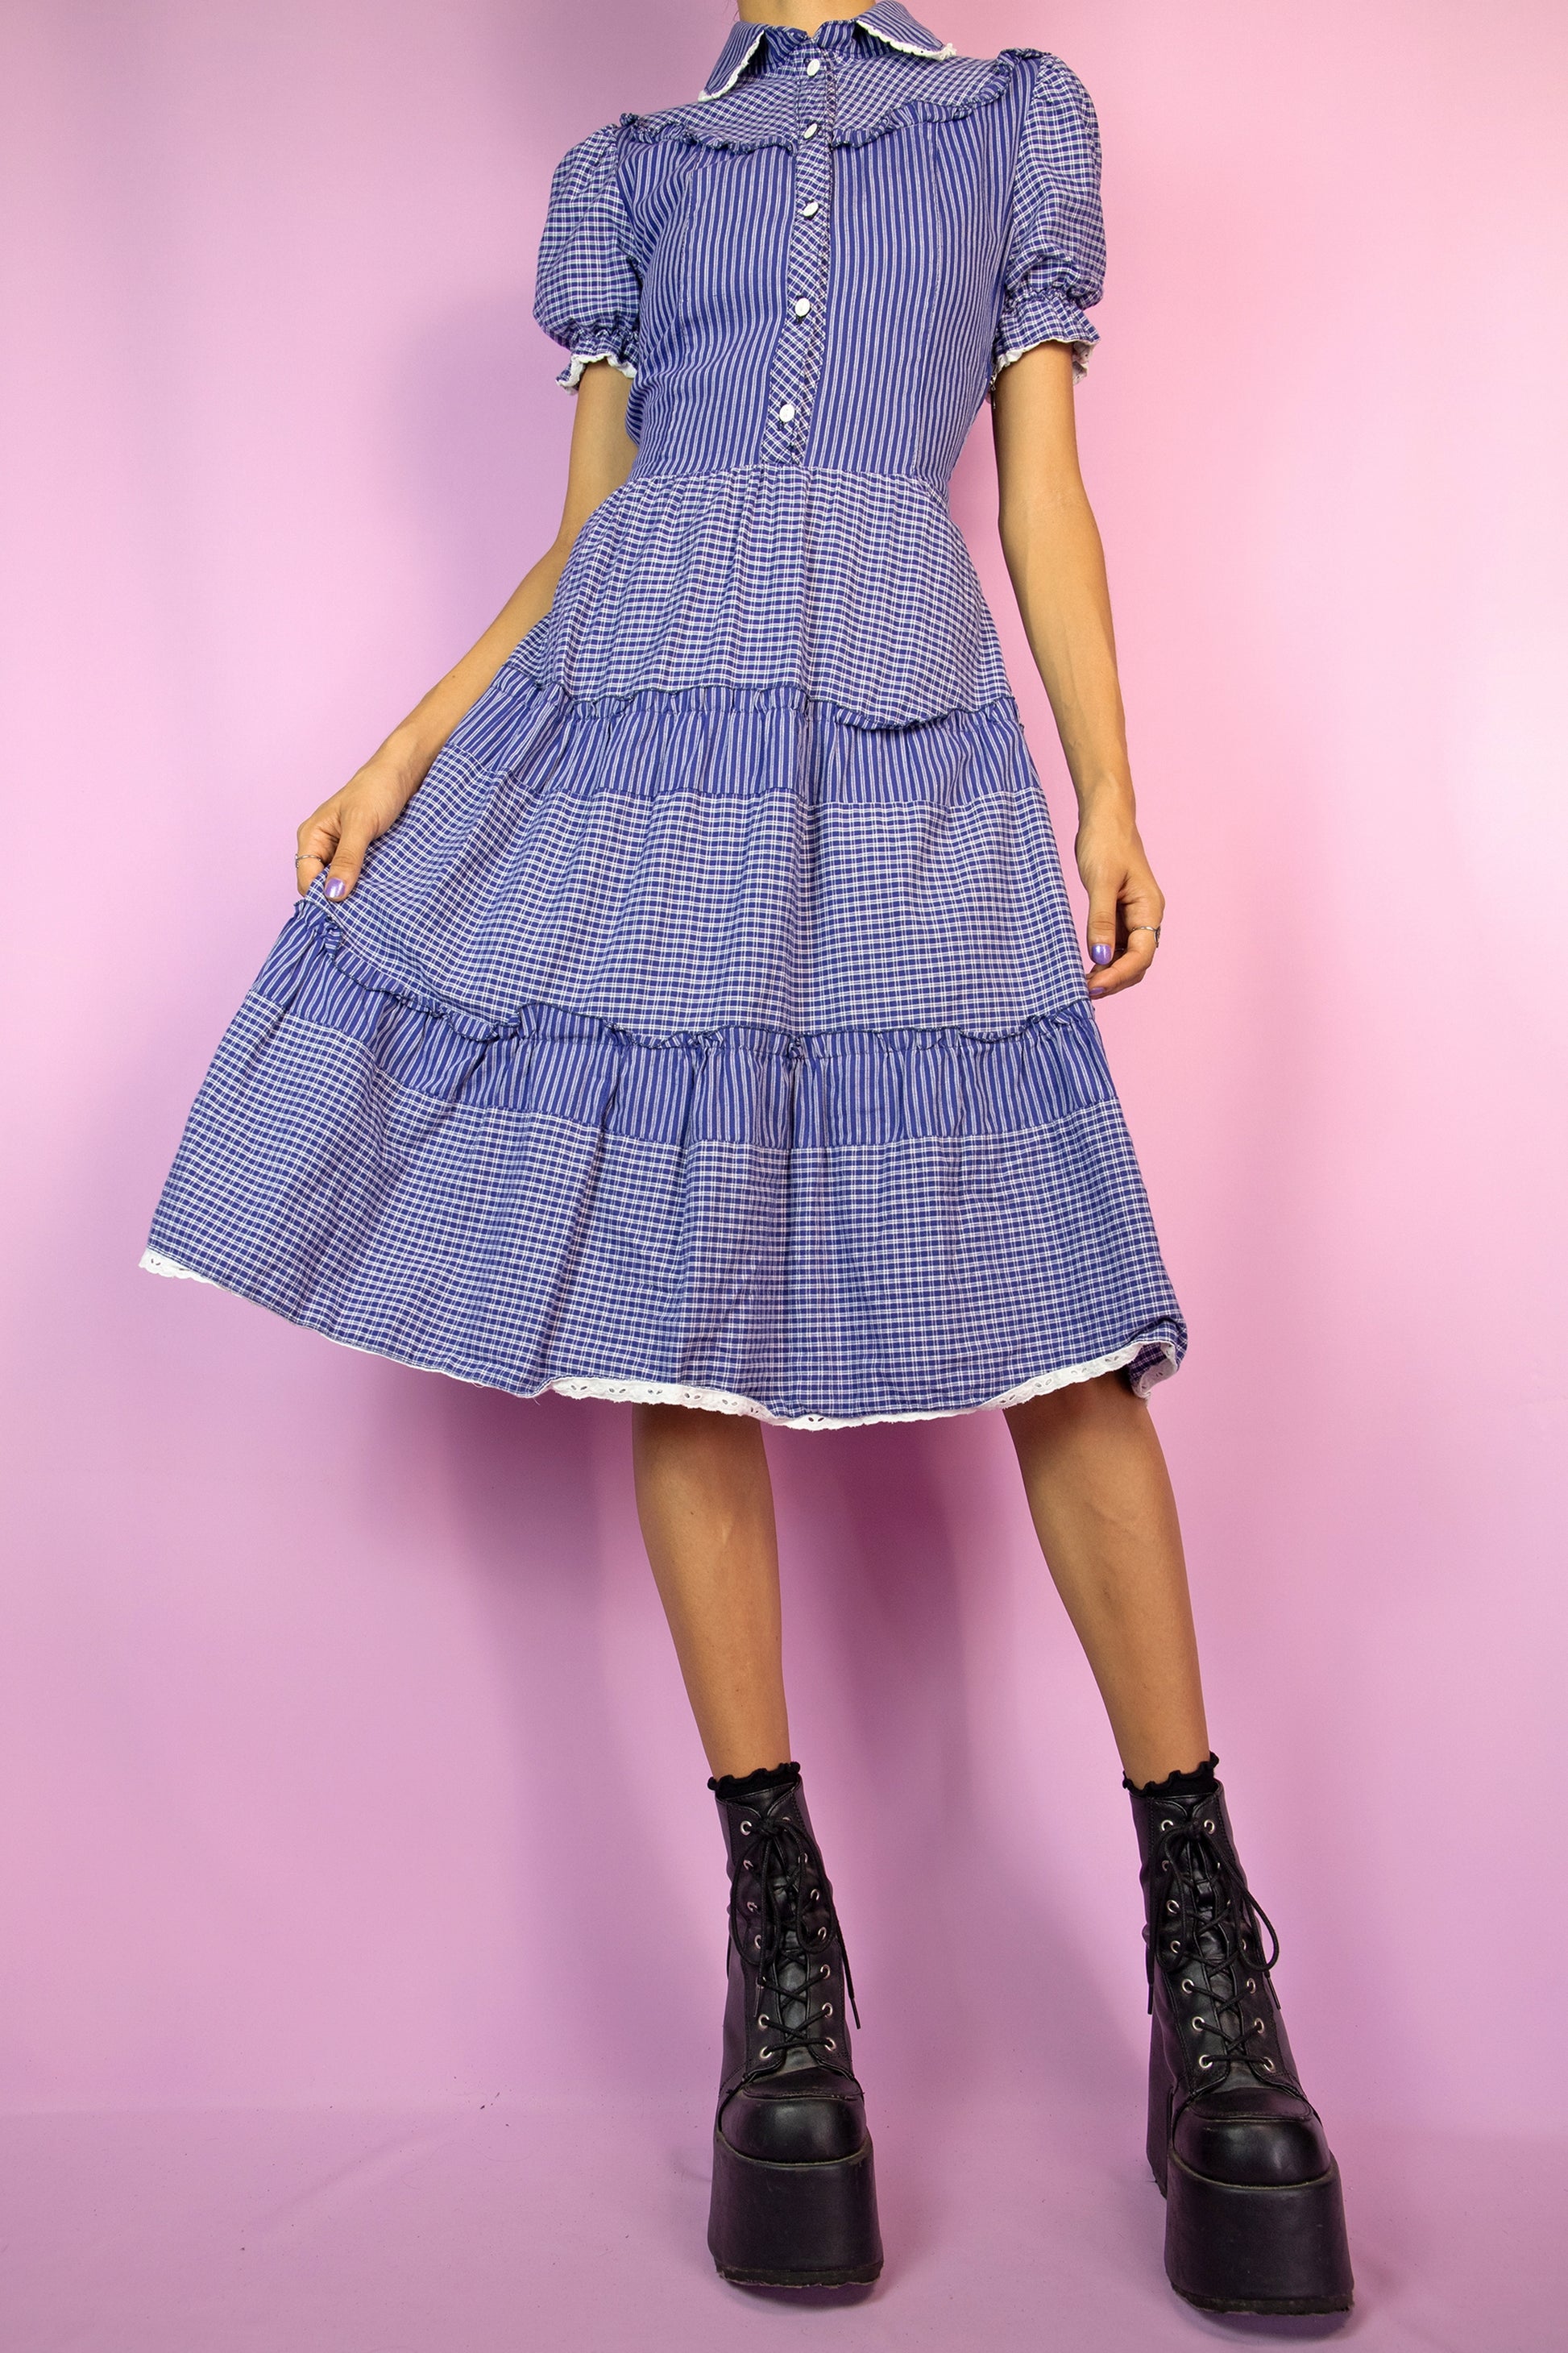 The Vintage 80s Cottage Blue Check Dress is a blue and white striped and checkered tiered dress with puff sleeves, a collar, button front and ruffle details. It also has a side zipper closure and a matching fabric belt. Milkmaid inspired 1980s prairie plaid midi dress.